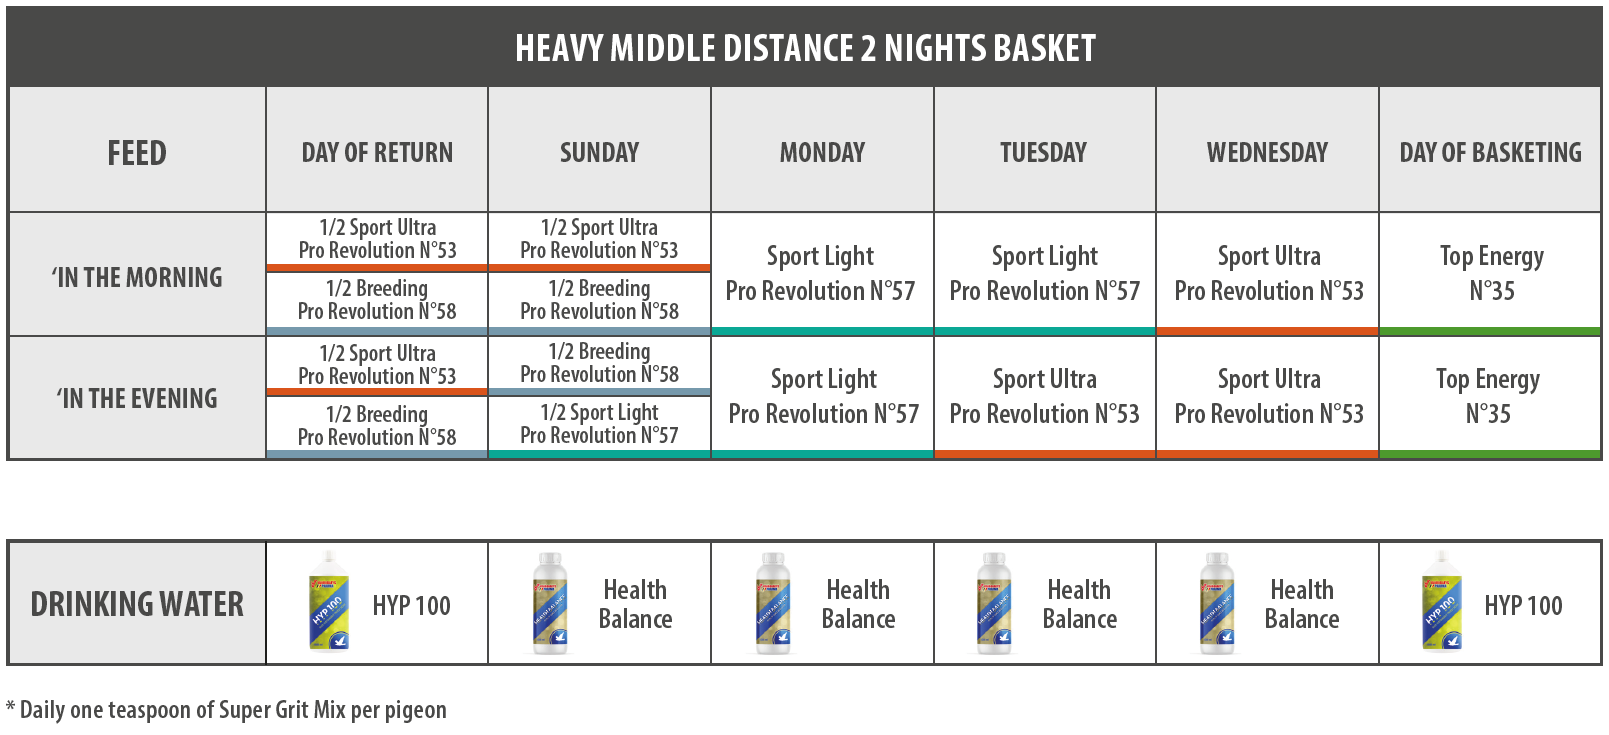 Heavy Middle Distance 2 nights basket